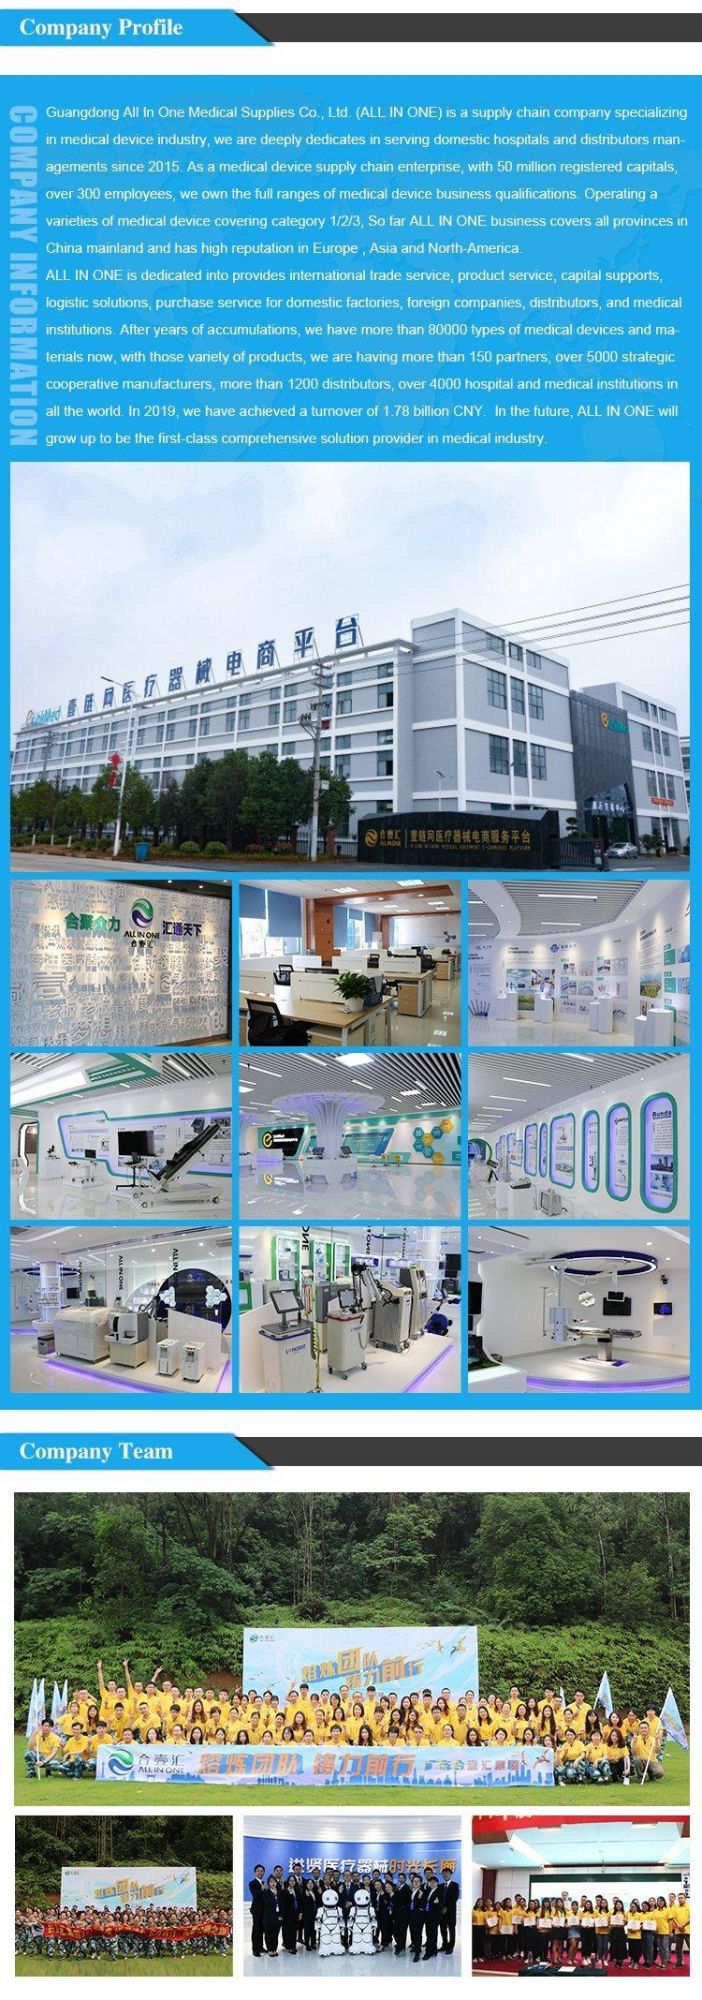 Medical Furniture Electric 2 Function Hospital Patient Bed